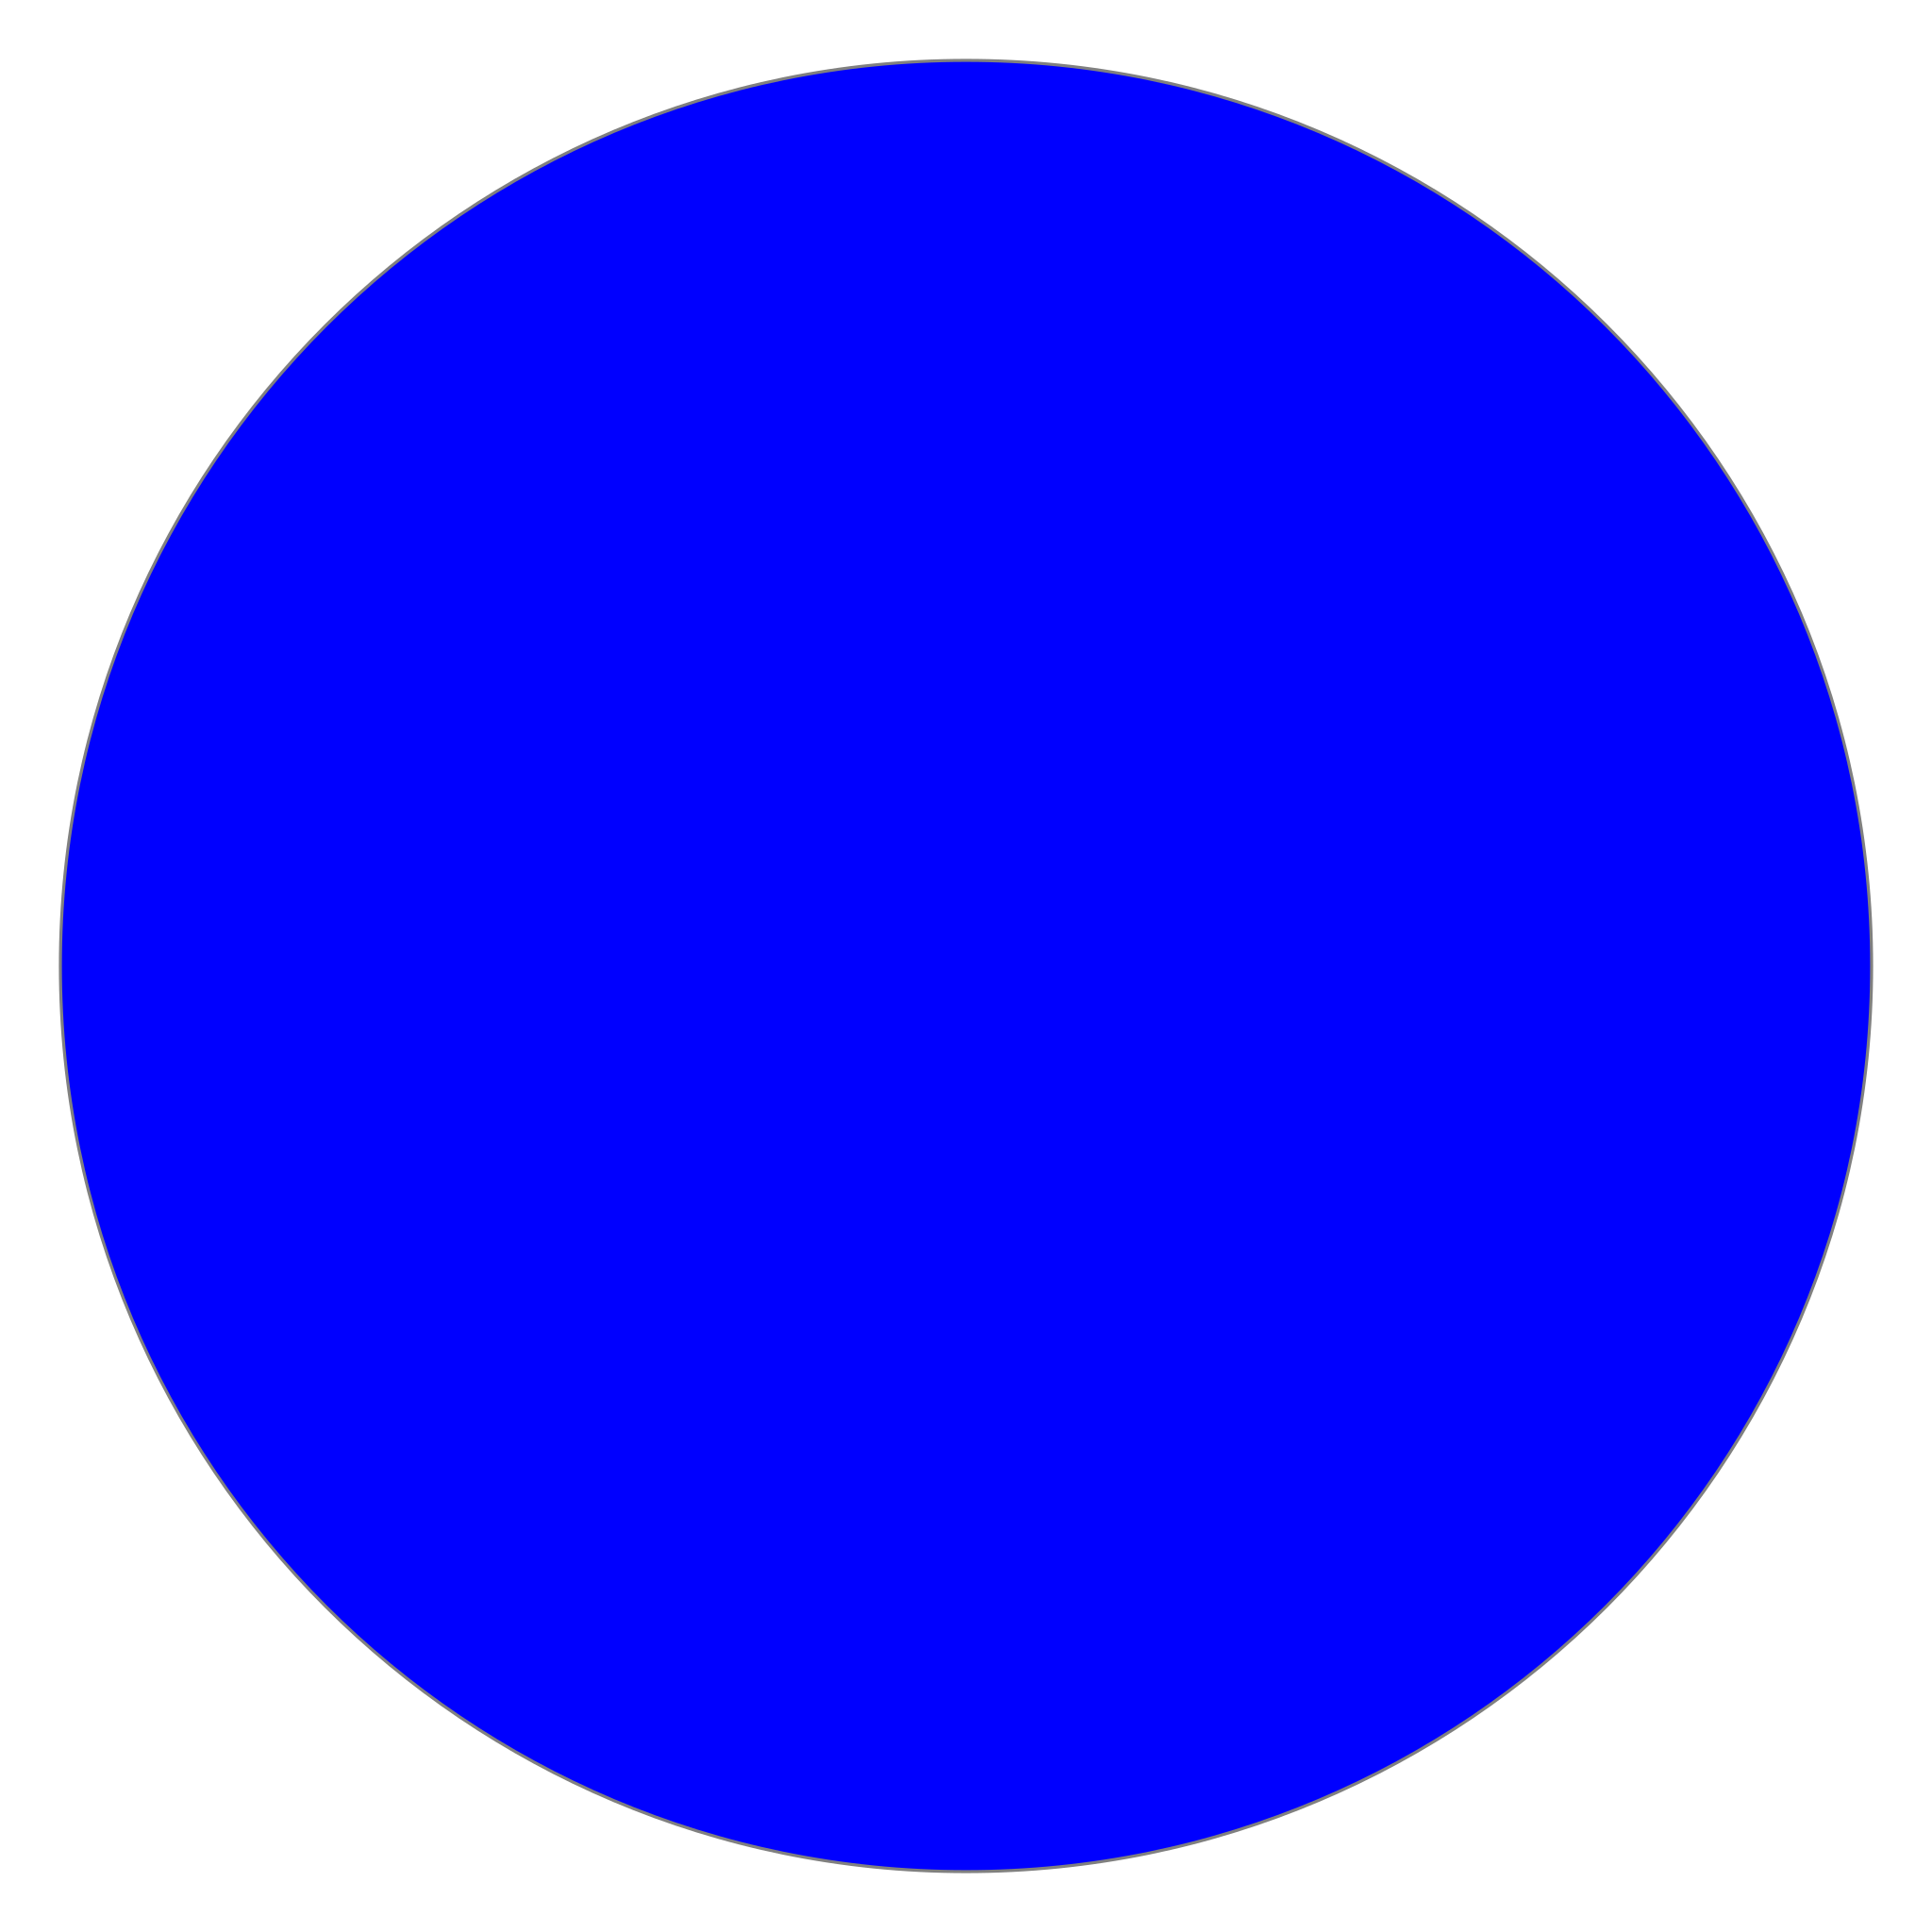 https://upload.wikimedia.org/wikipedia/commons/thumb/3/35/Location_dot_blue.svg/2048px-Location_dot_blue.svg.png